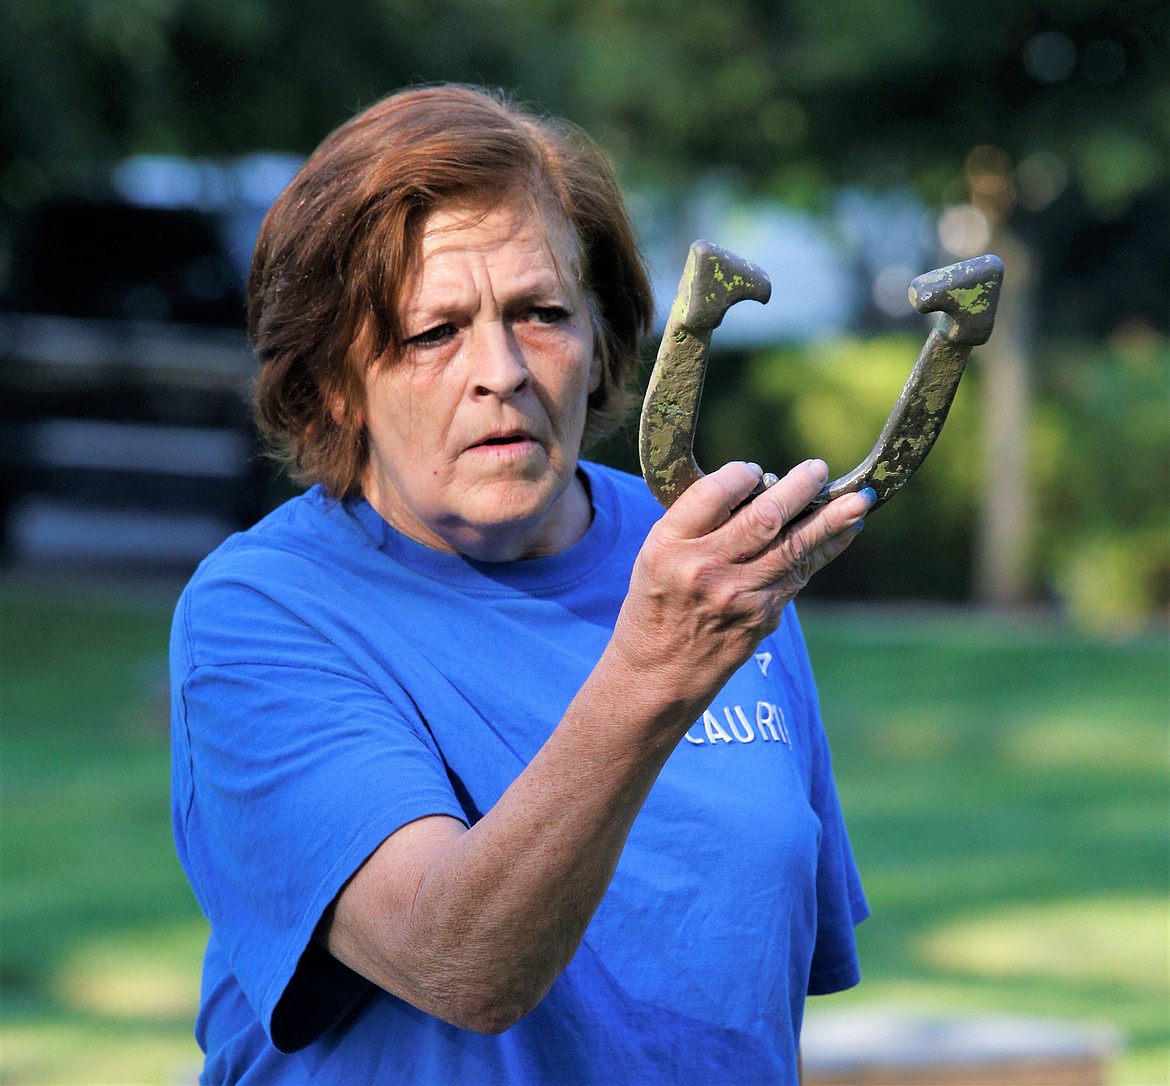 Laurie Dale of Athol eyes the stake before throwing a horseshoe during practice on Thursday at Winton Park.